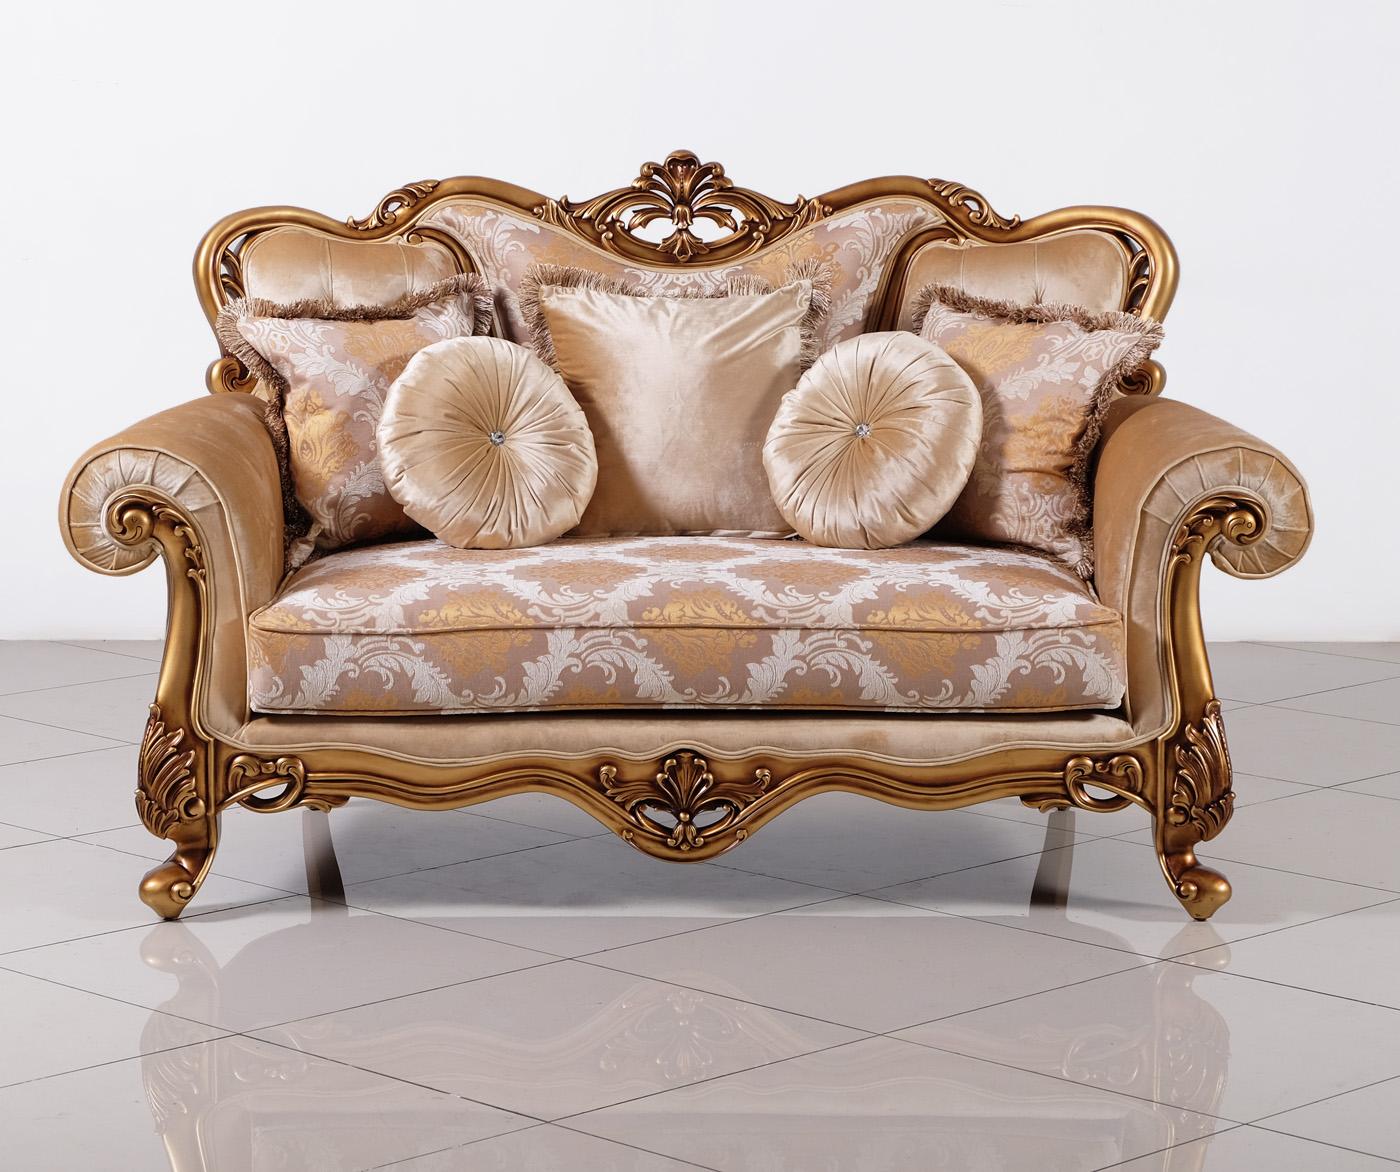 Classic, Traditional Loveseat CLEOPATRA 4798-L in Gold, Bronze Fabric